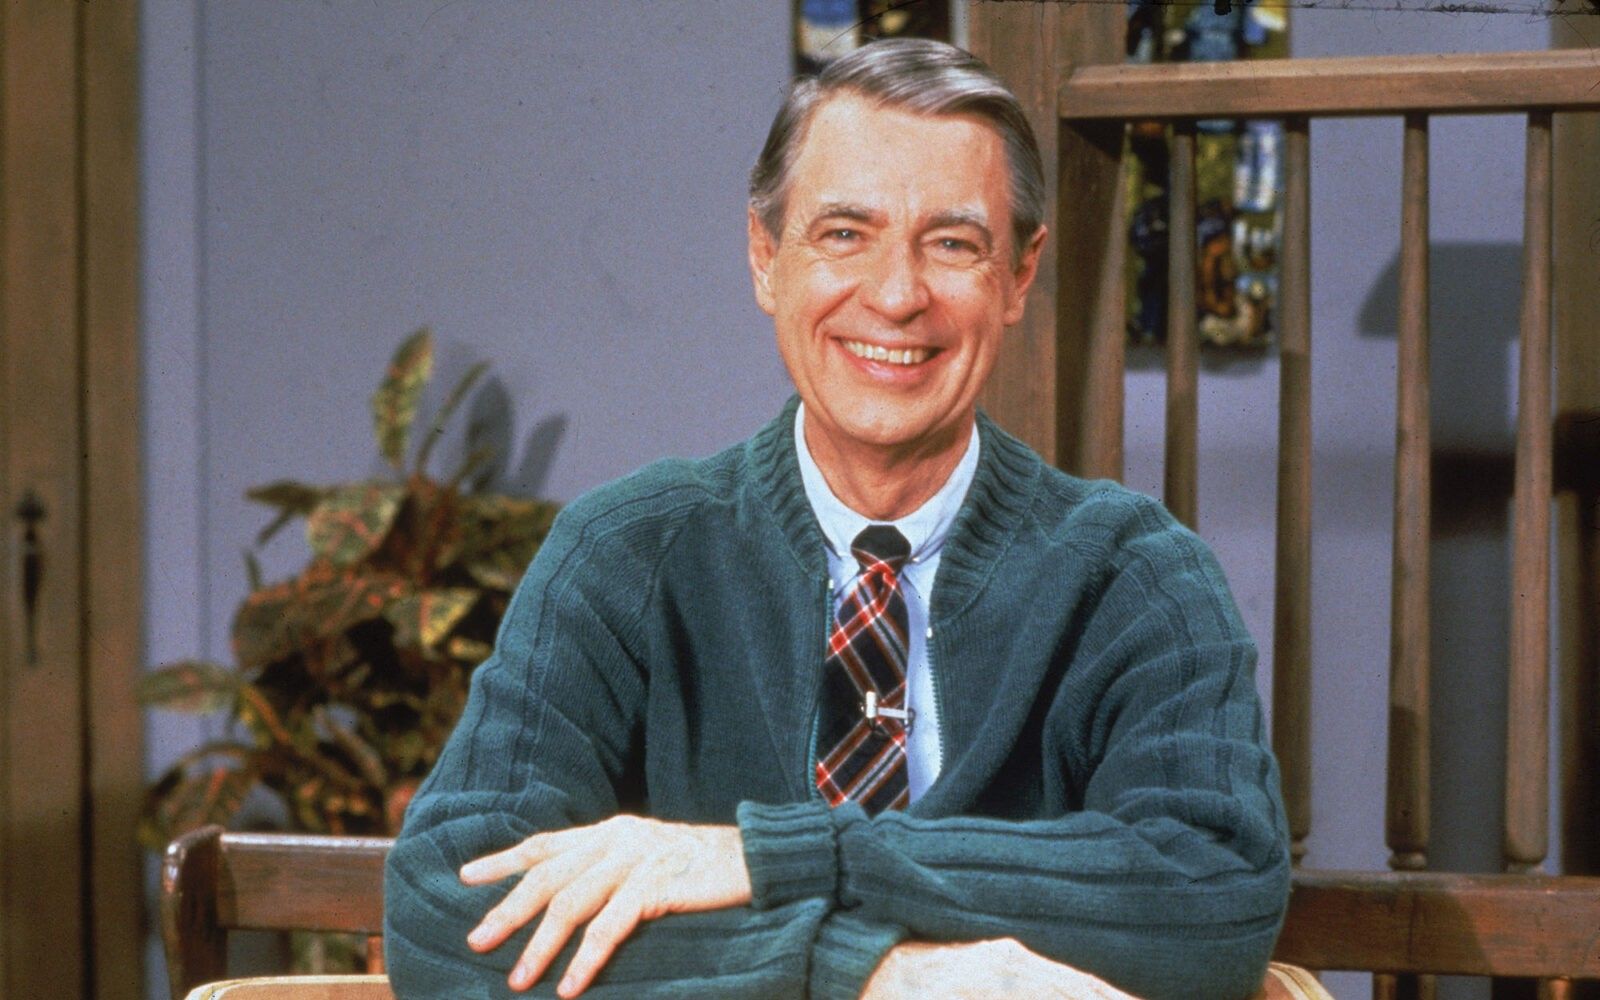 Who Was Mister Rogers Really When the Cameras Turned Off?